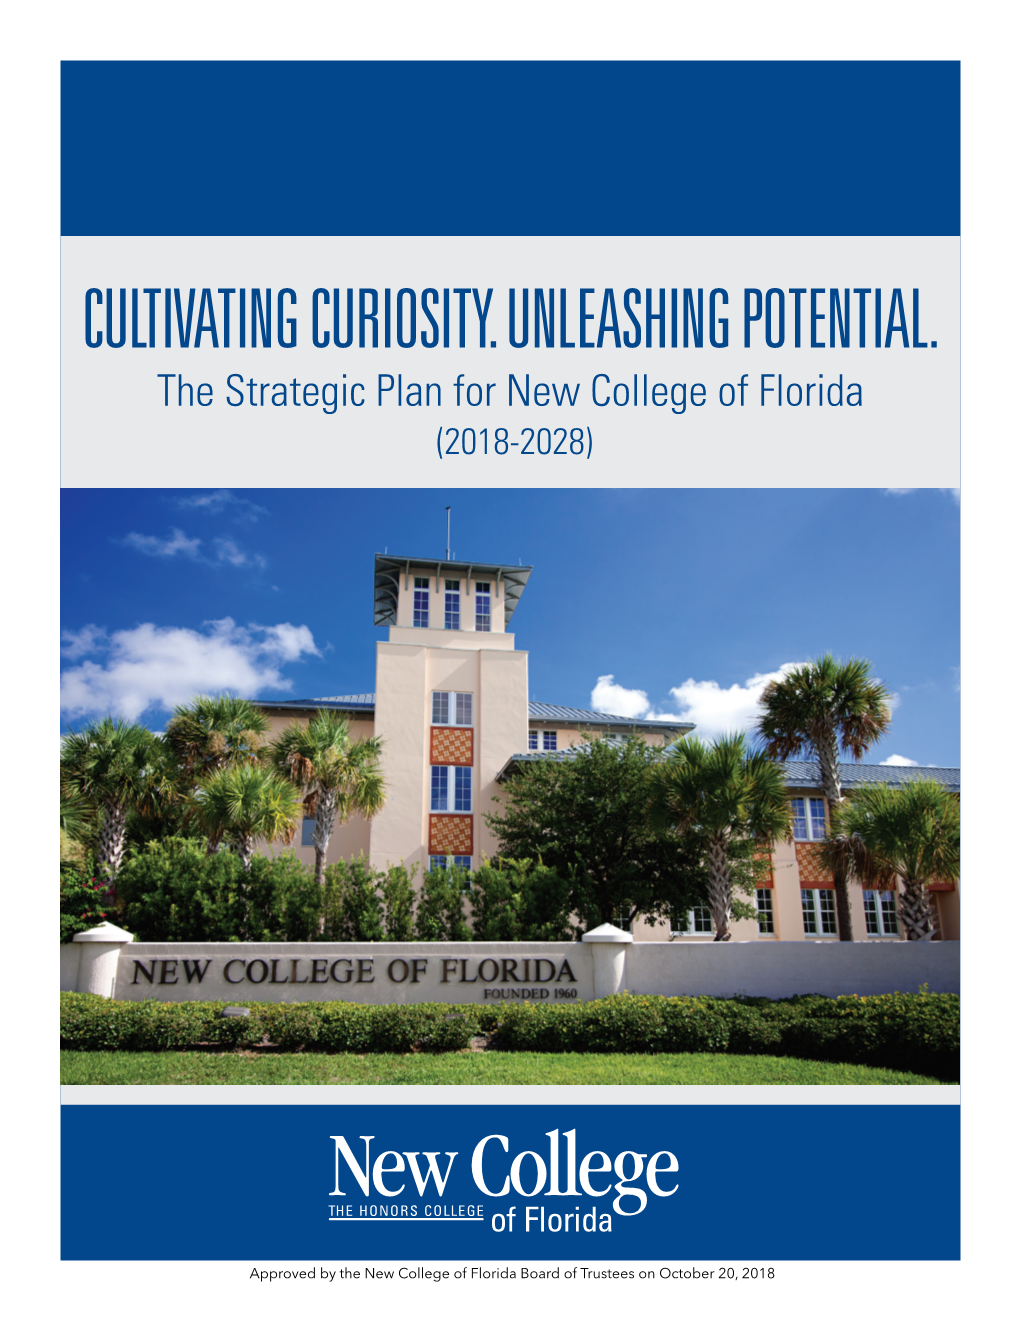 CULTIVATING CURIOSITY. UNLEASHING POTENTIAL. the Strategic Plan for New College of Florida (2018-2028)